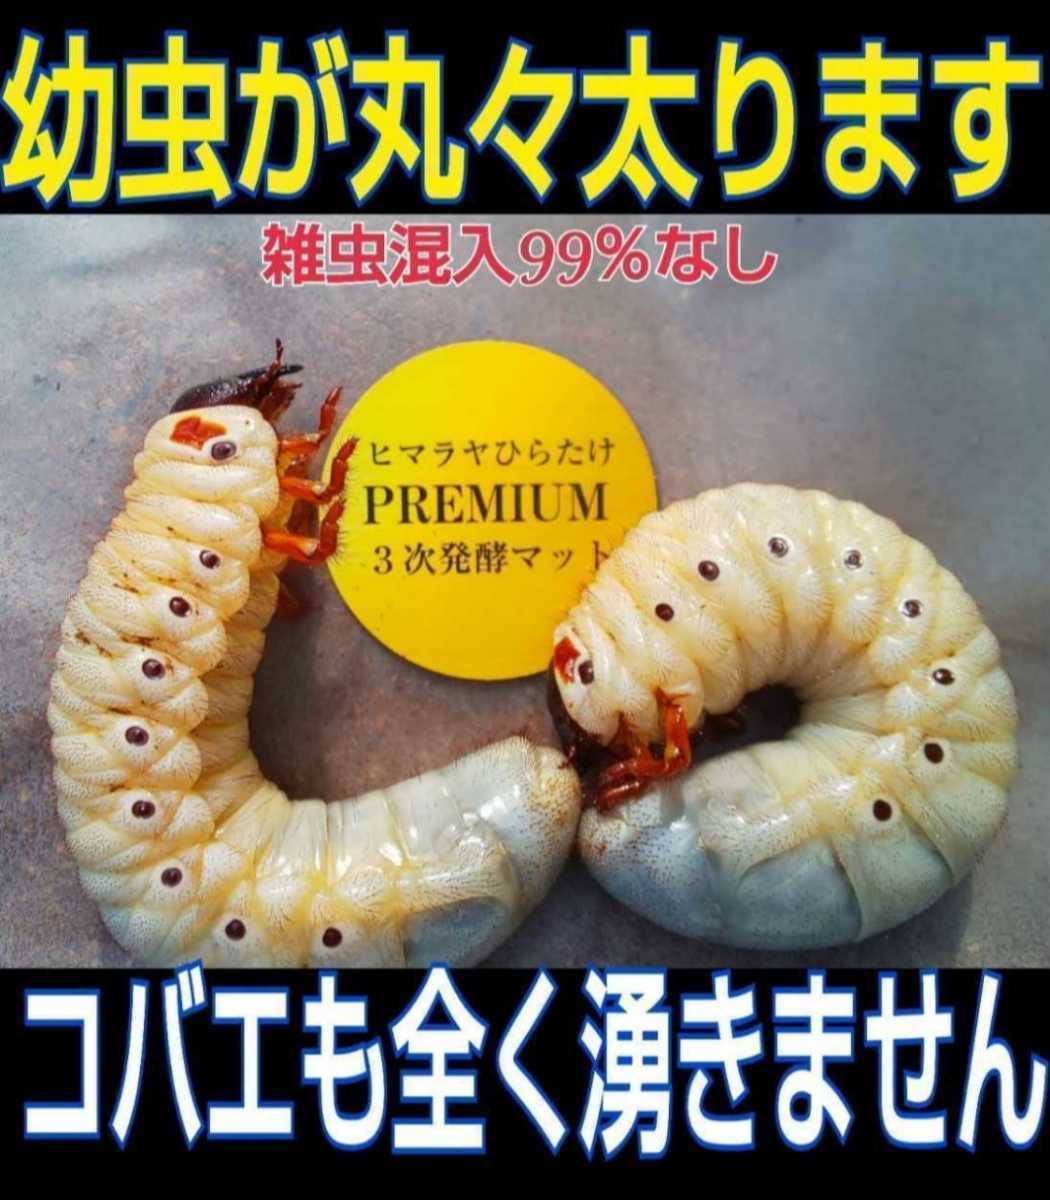  evolved! finest quality premium 3 next departure . rhinoceros beetle mat [4 sack ] special amino acid * symbiosis bacteria 3 times combination production egg also eminent. . insect ... not!